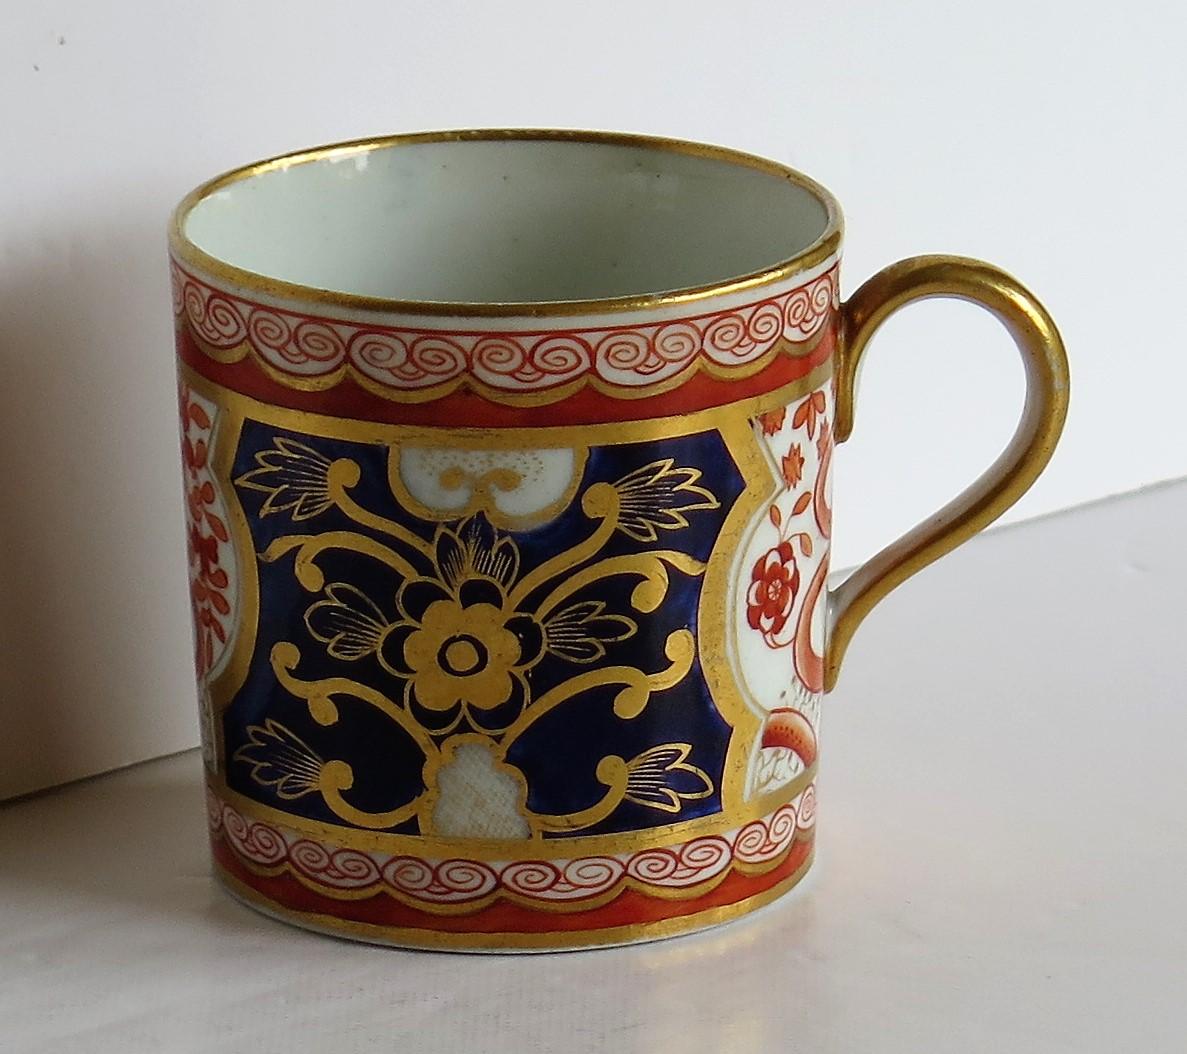 English Georgian Porcelain Coffee Can by Spode Hand-Painted Dollar Ptn 715, circa 1805